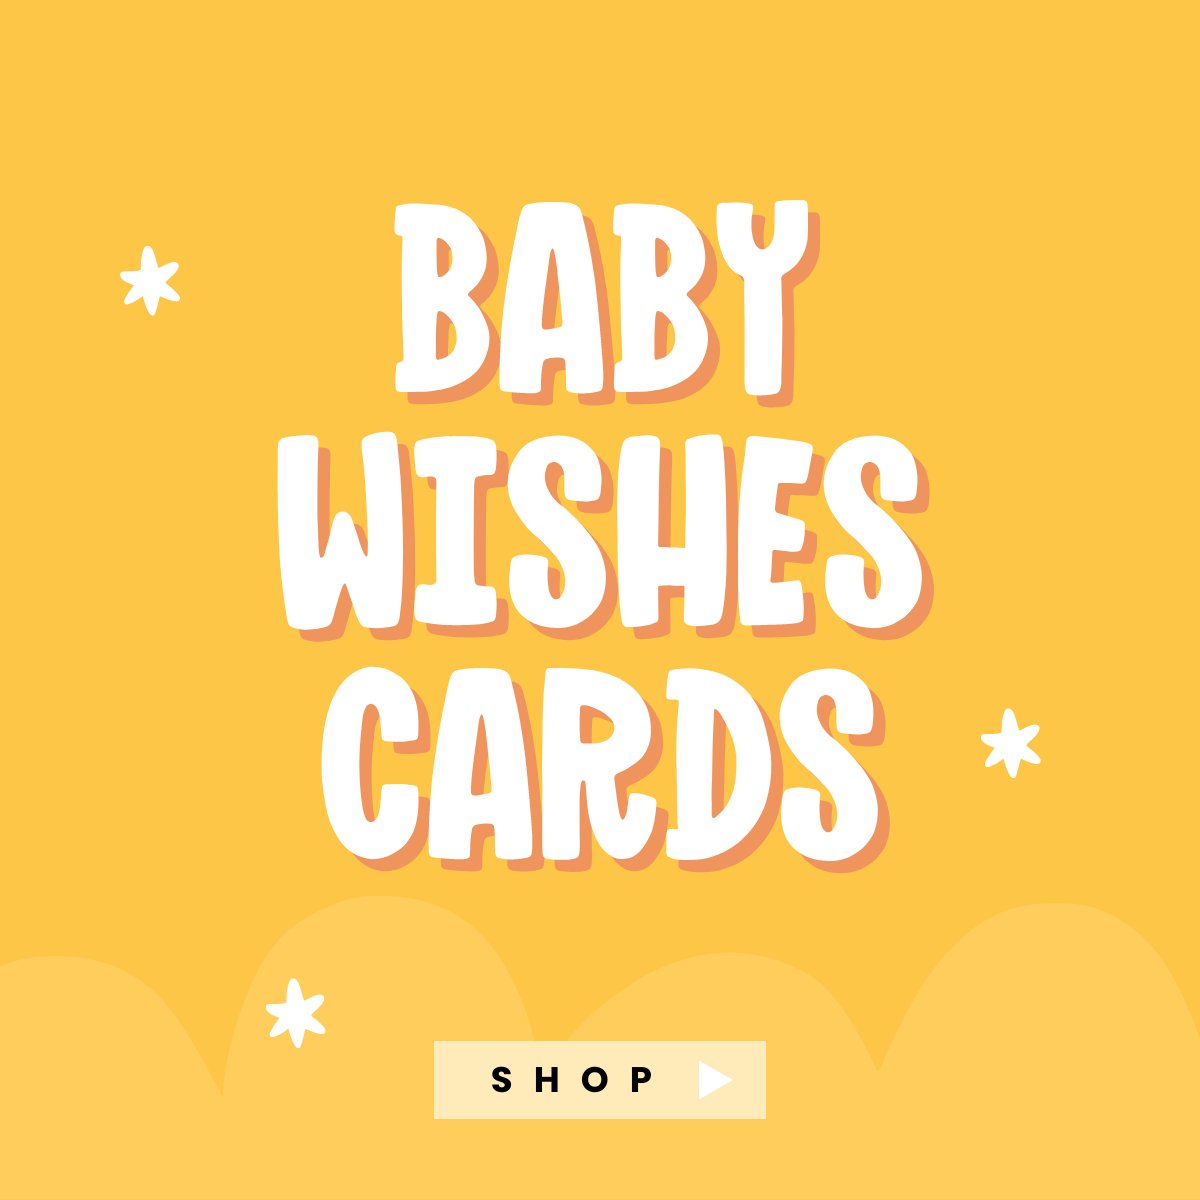 BABY WISHES CARDS